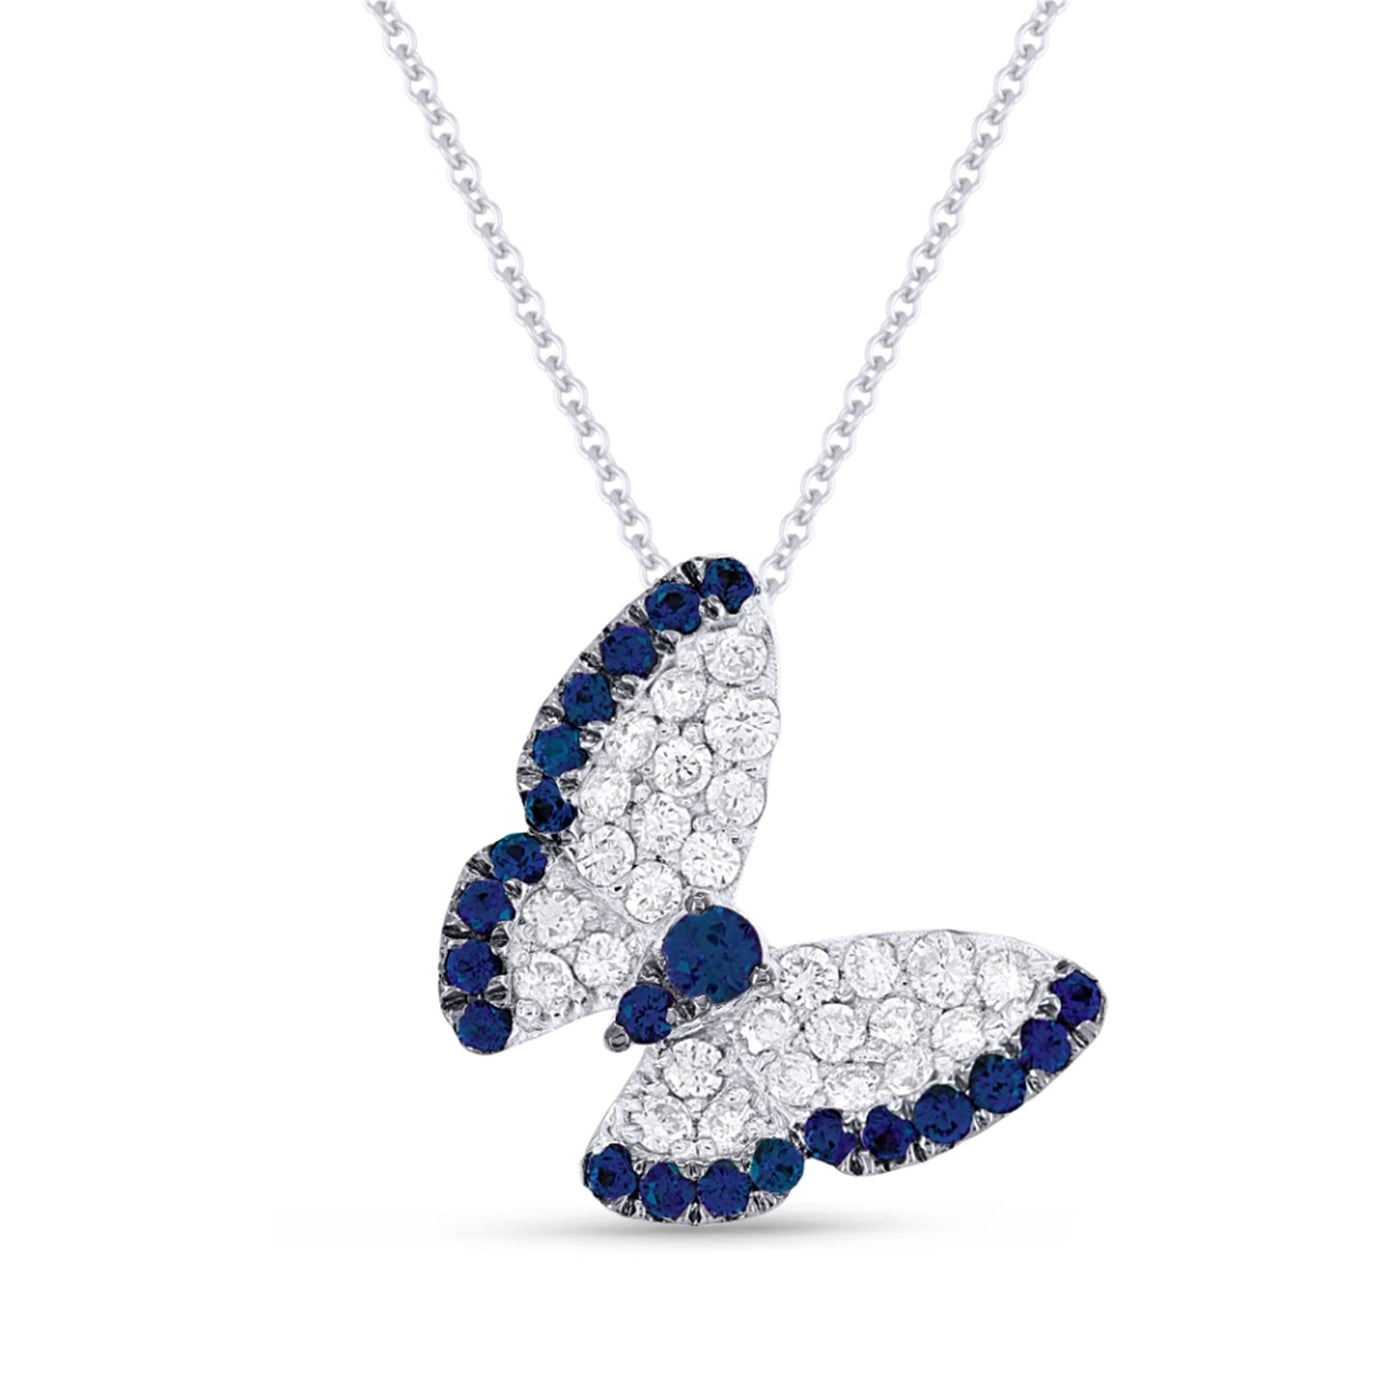 14K White Gold .69ctw Animal Inspired Style Necklace Featuring Diamonds and Sapphires